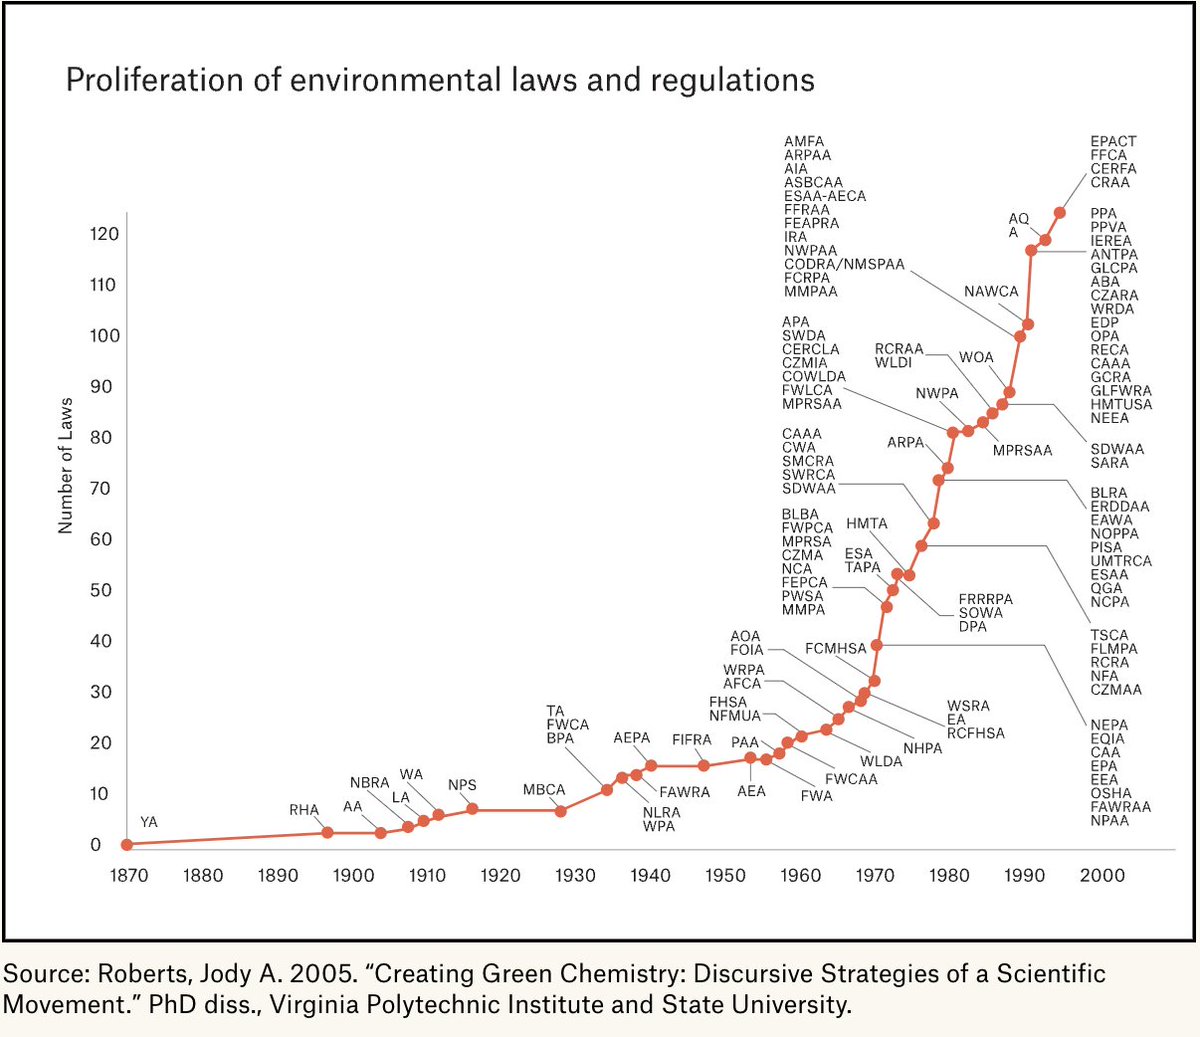 American environmental laws and regulations over time